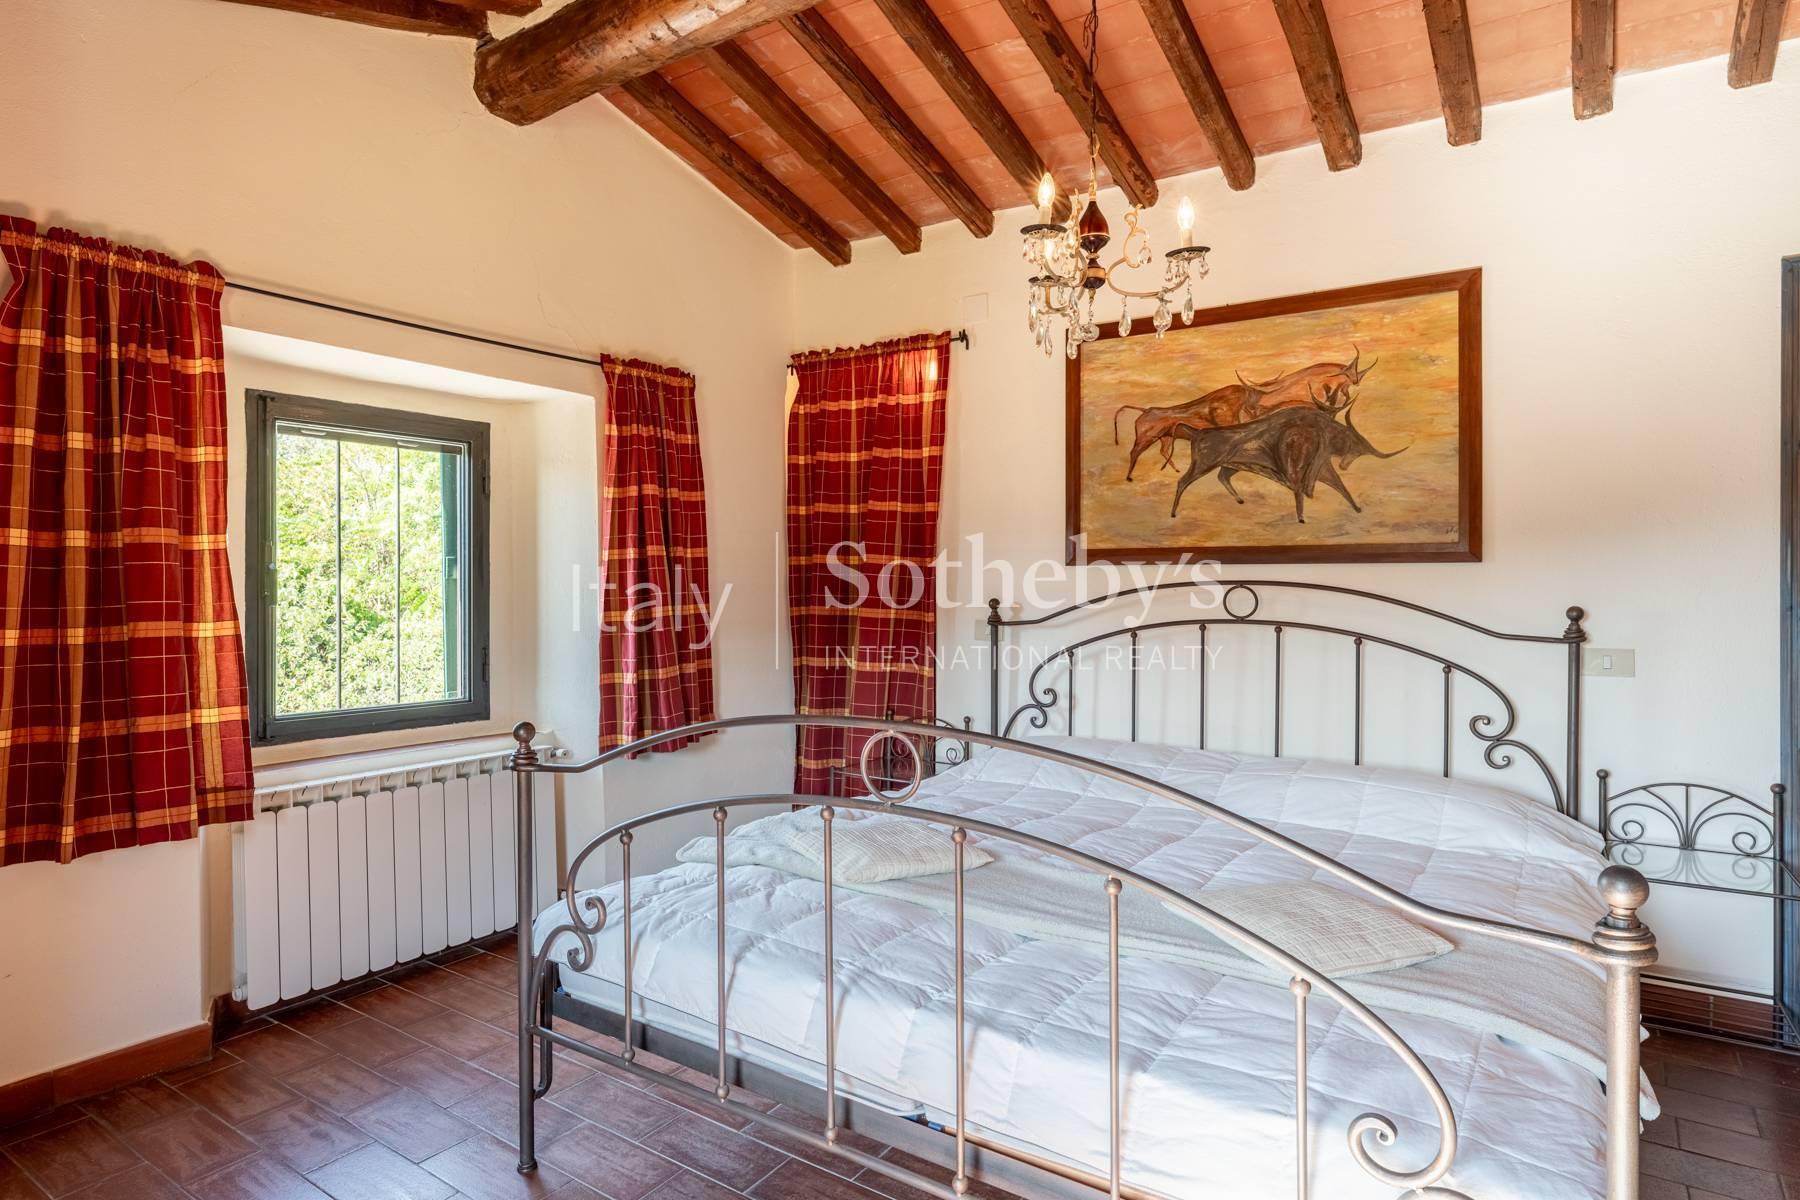 One-of-a-kind Tuscan cottage on the hills between Lucca and Montecatini Terme - 16